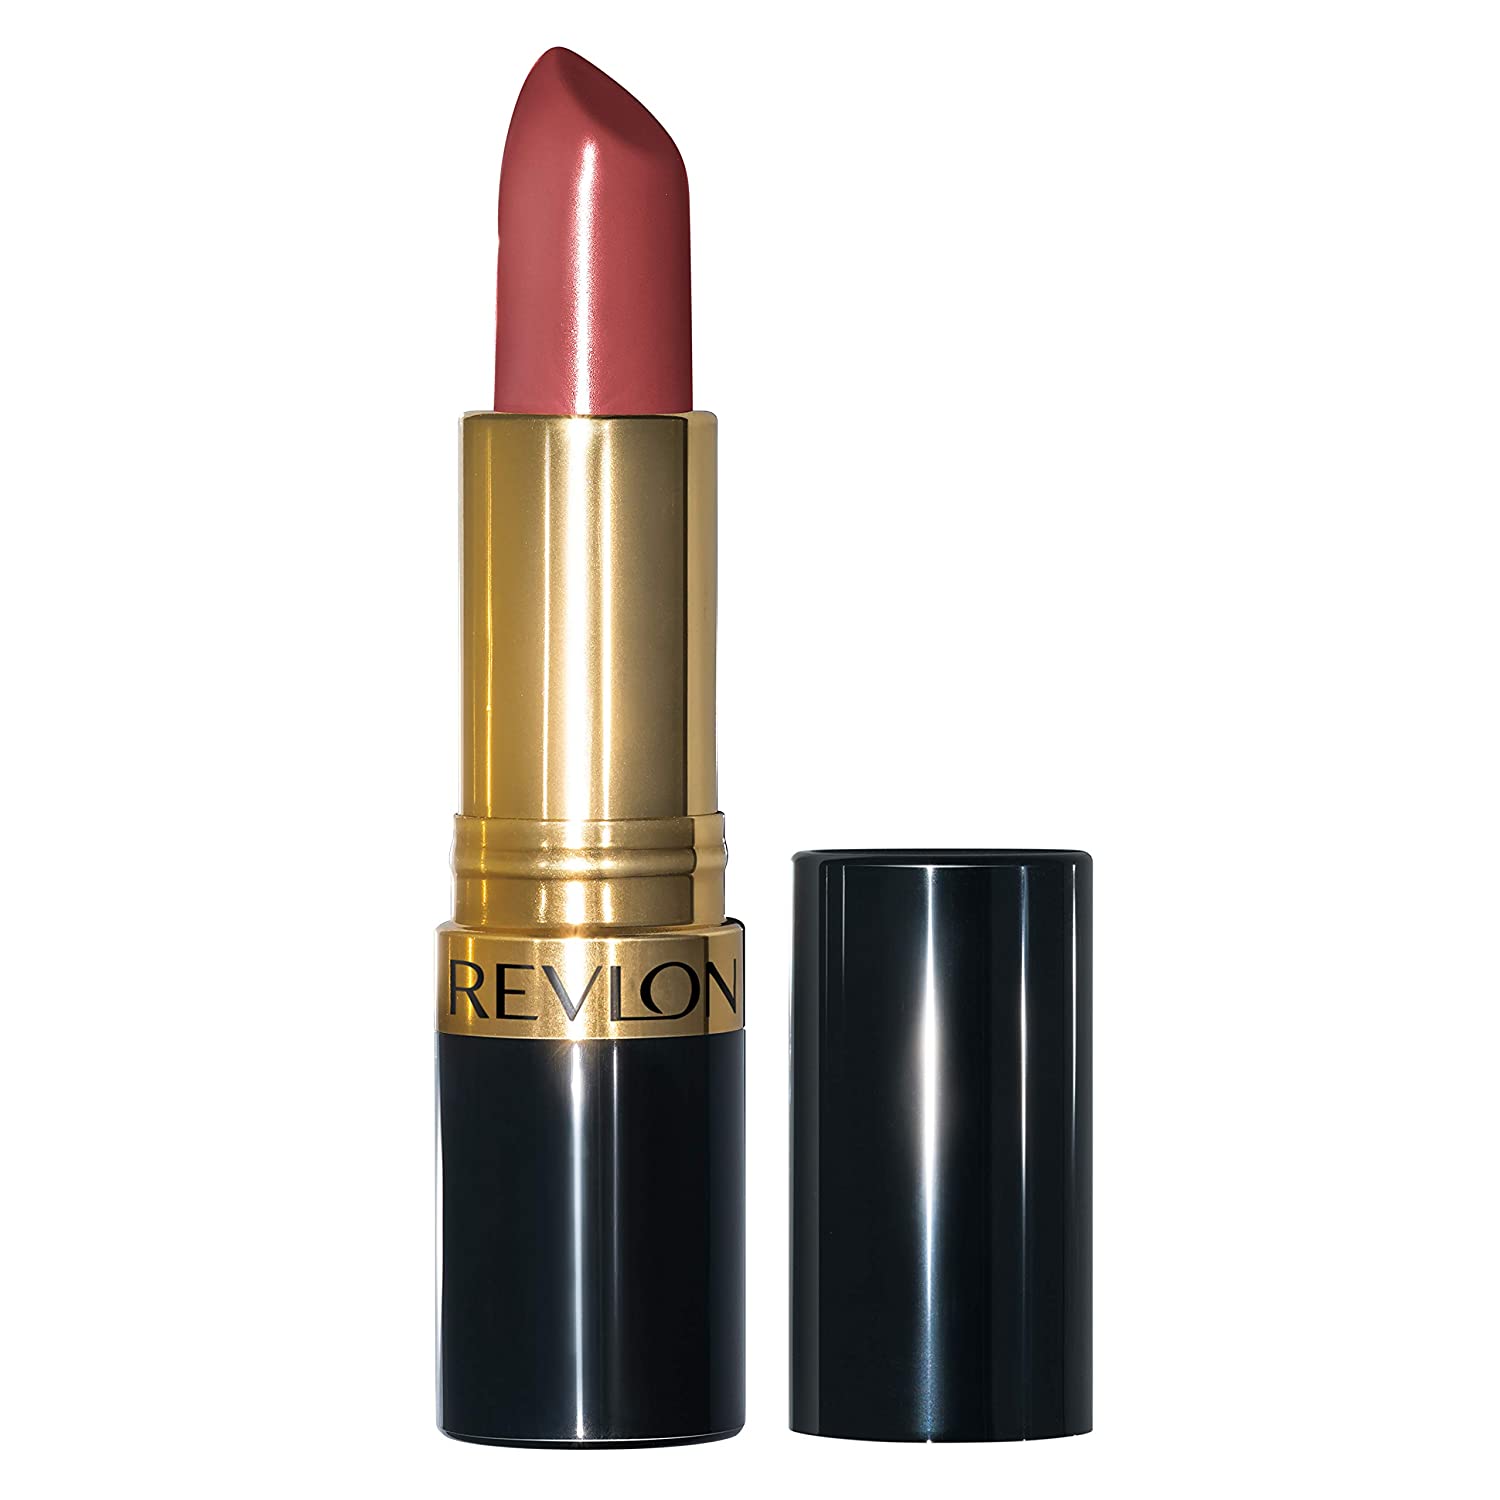 ''Revlon Super Lustrous LIPSTICK, High Impact Lipcolor with Moisturizing Creamy Formula, Infused with